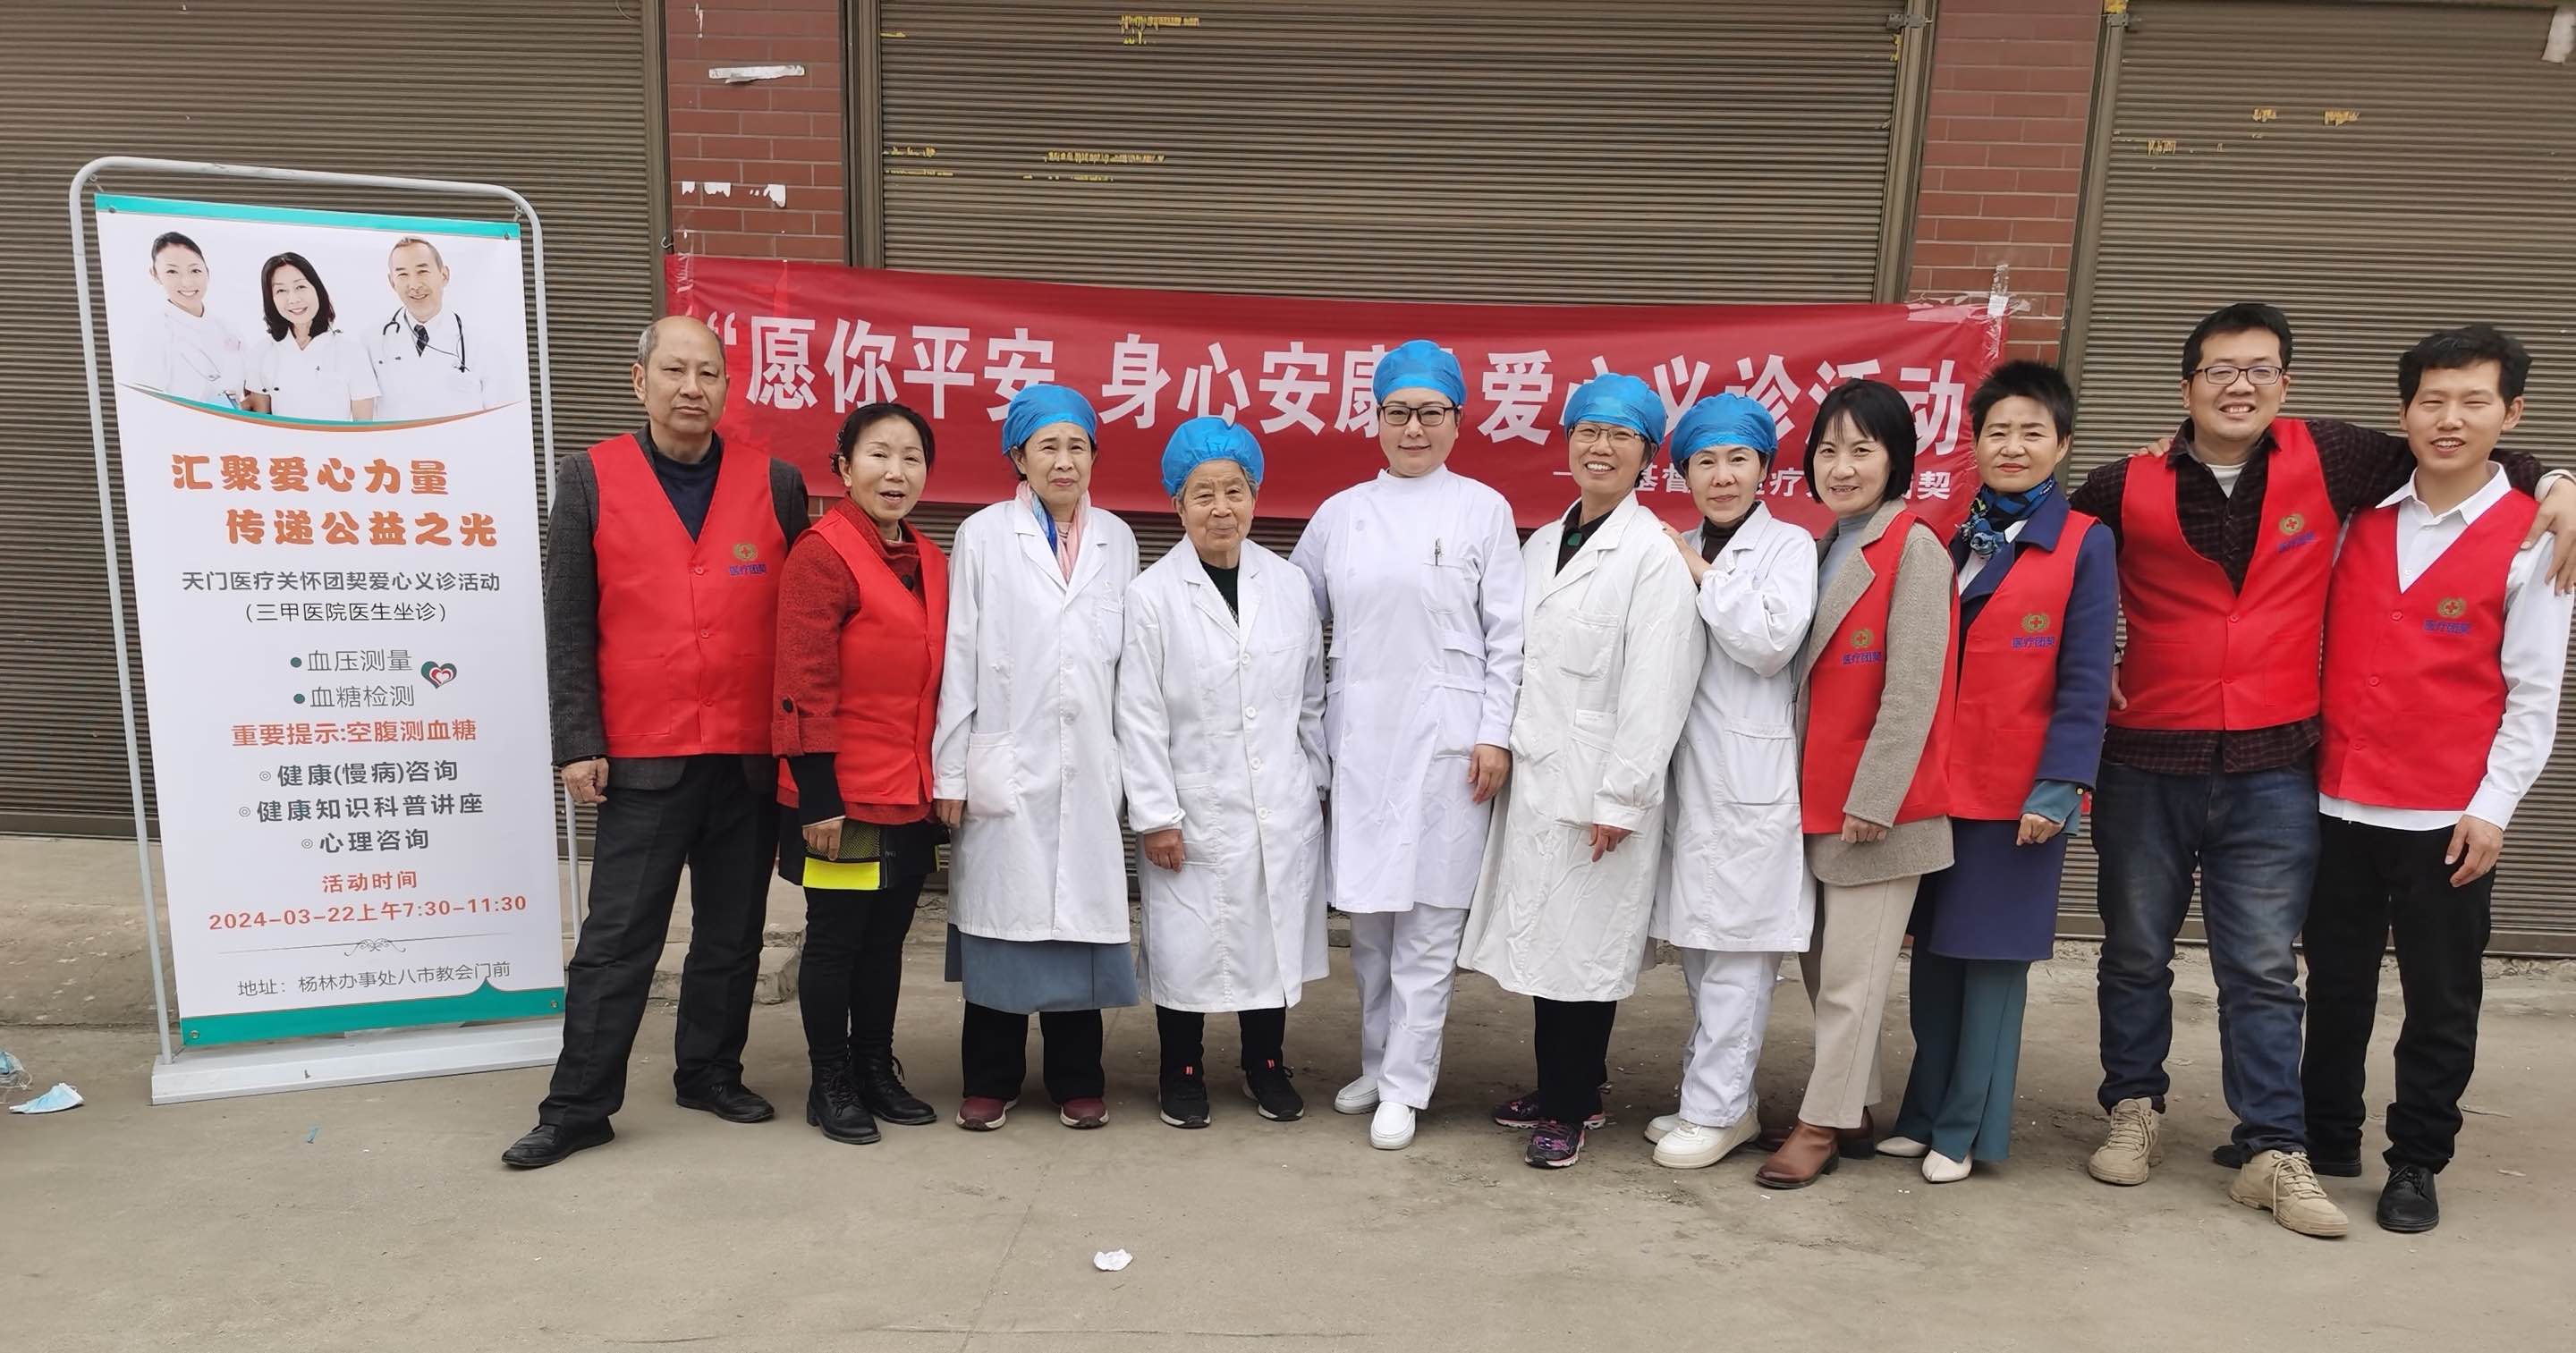 Medical staff and volunteers took a group photo at the “Wishing You Peace and Good Health, both Physically and Mentally” Christian Medical Care Free Clinic in front of the Bashi Gospel Church in Bashi Village, Yanglin Street, Tianmen City, Hubei Province, on March 16, 2024.